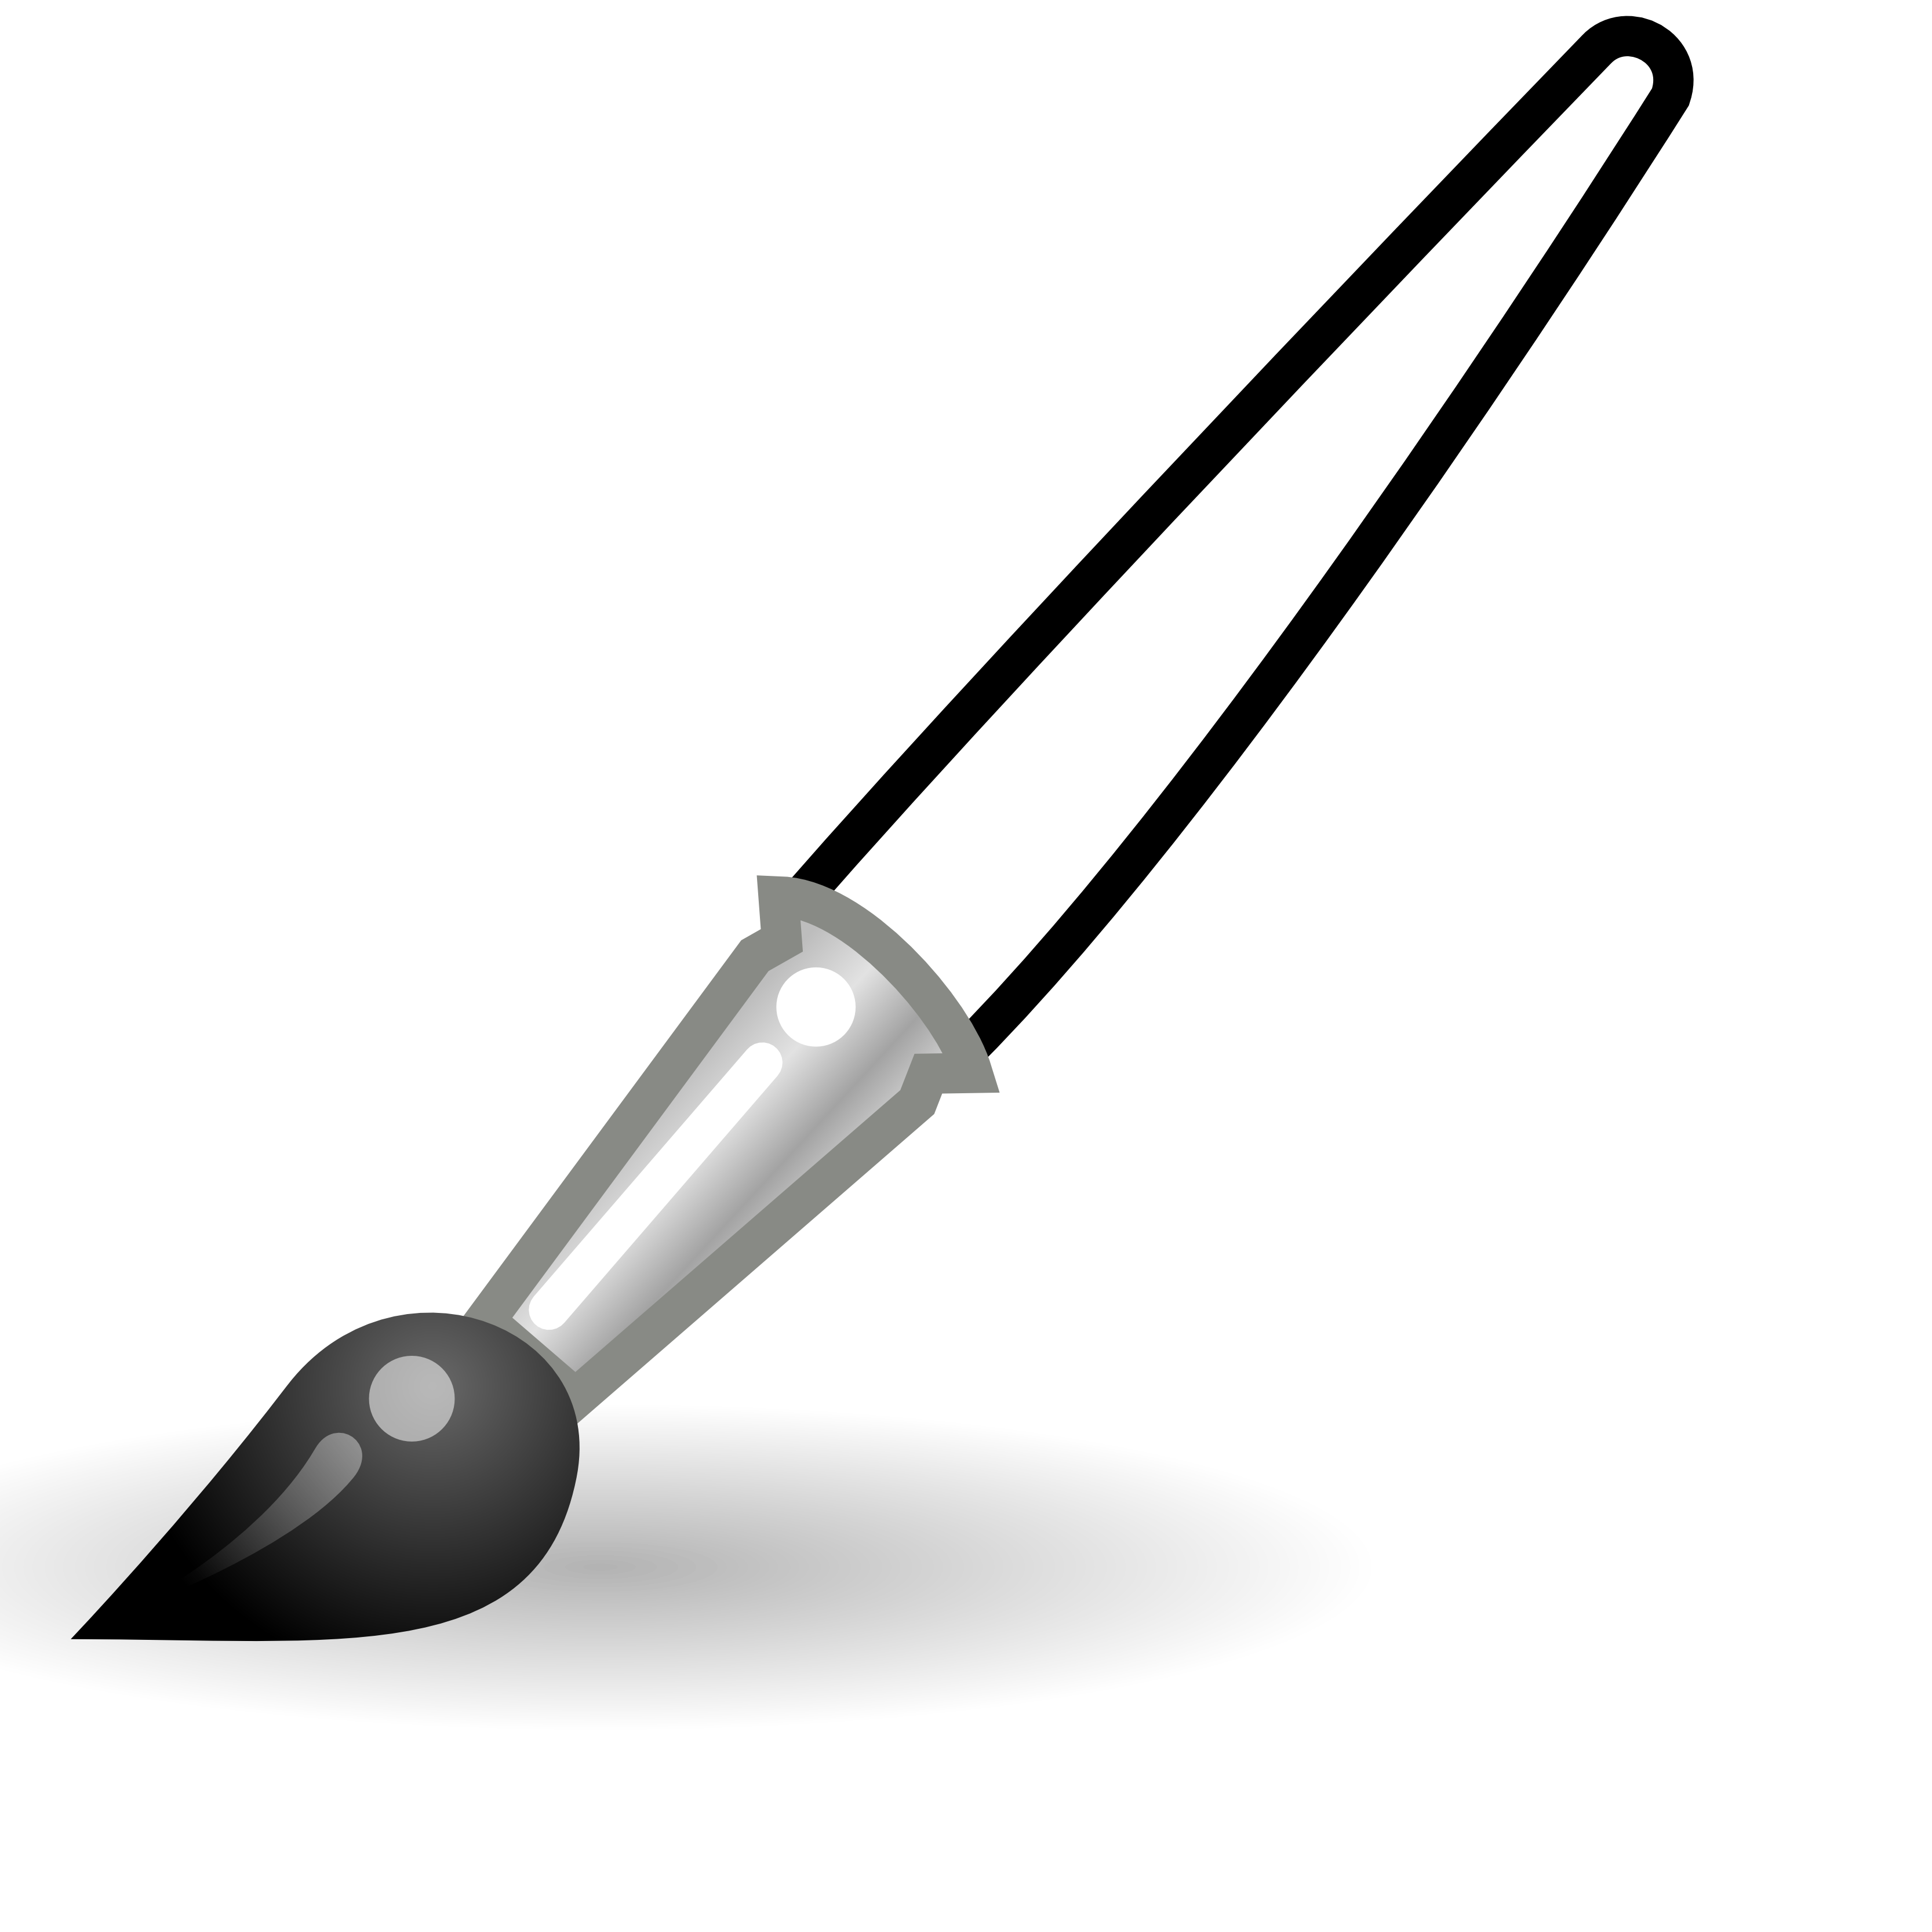 Paintbrush Clipart Black And White - Free Clipart ...